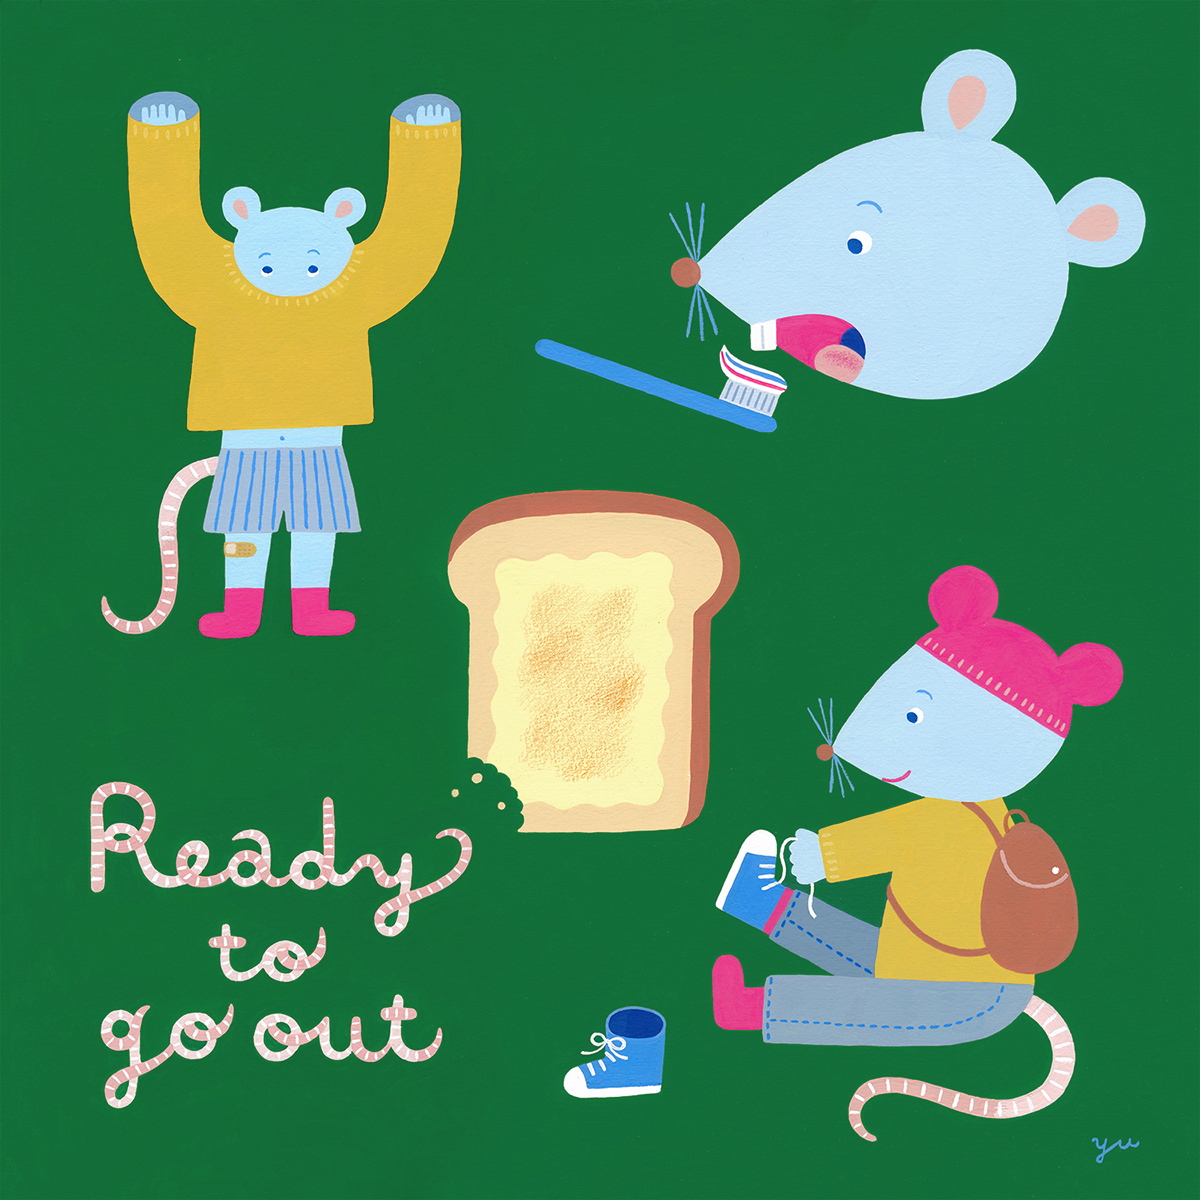 「Ready To Go Out　おでかけのじゅんび」（「12人の贈り物展2019」展示作品）